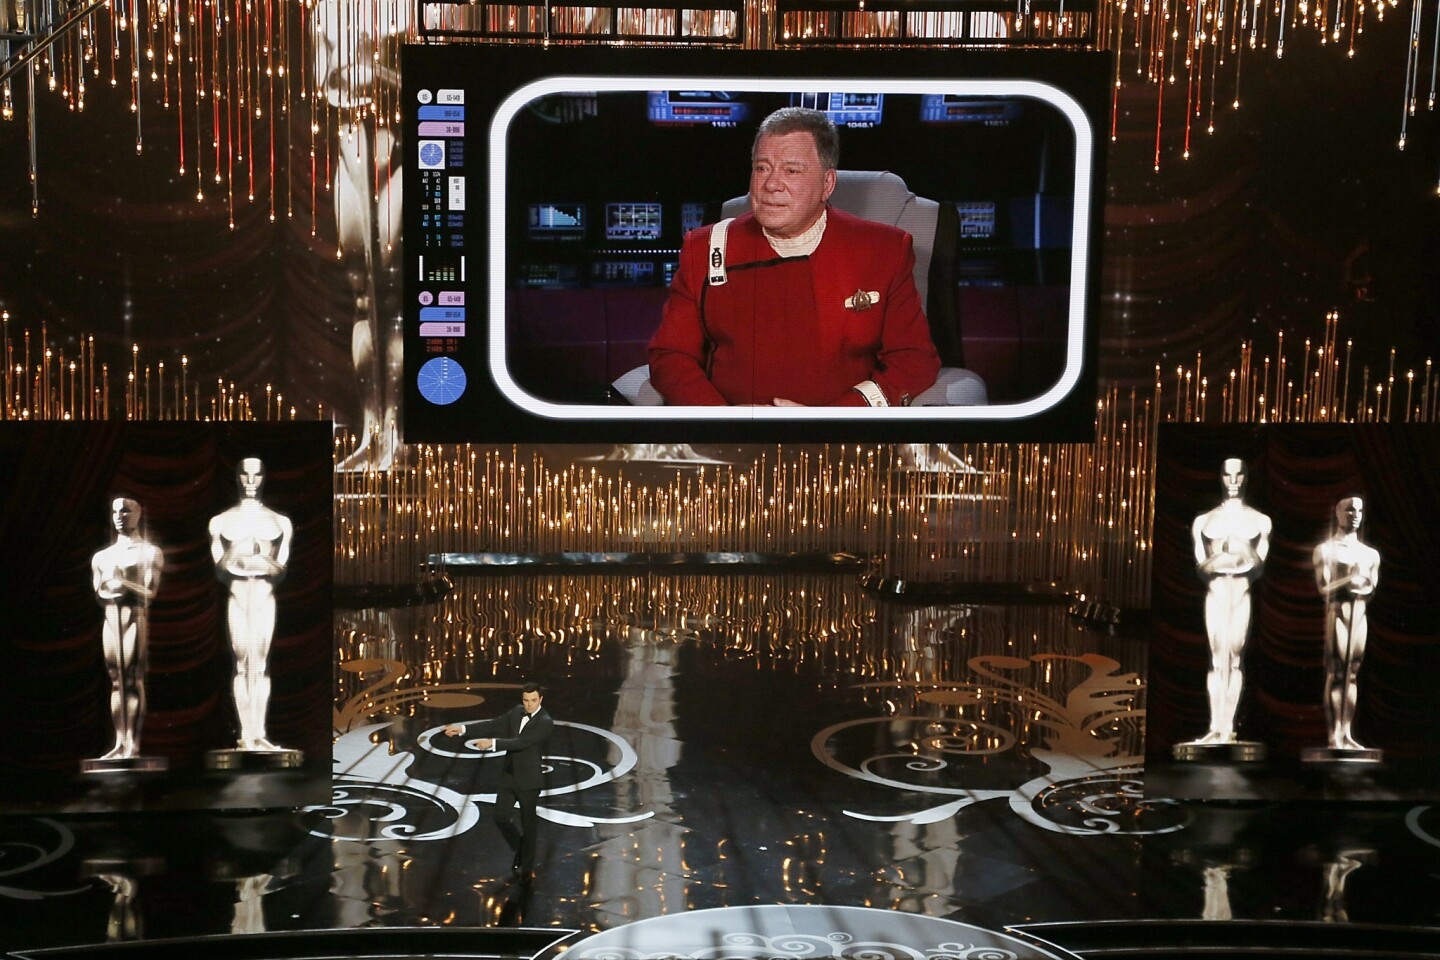 Seth MacFarlane's opener proved to be one of the most bewildering Oscar openers in recent memory. With a cameo appearance by William Shatner squeezed into his old "Star Trek" uniform, a tribute to film nudity called "We Saw Your Boobs" with the Los Angeles Gay Men's Chorus and finally a song and dance with Channing Tatum, Charlize Theron, Joseph Gordon-Levitt and Daniel Radcliffe, some people were probably numb by the time they got to the sock-puppet re-creation of "Flight" or MacFarlane's monologue jokes that seemed cribbed from Bob Hope circa 1965.